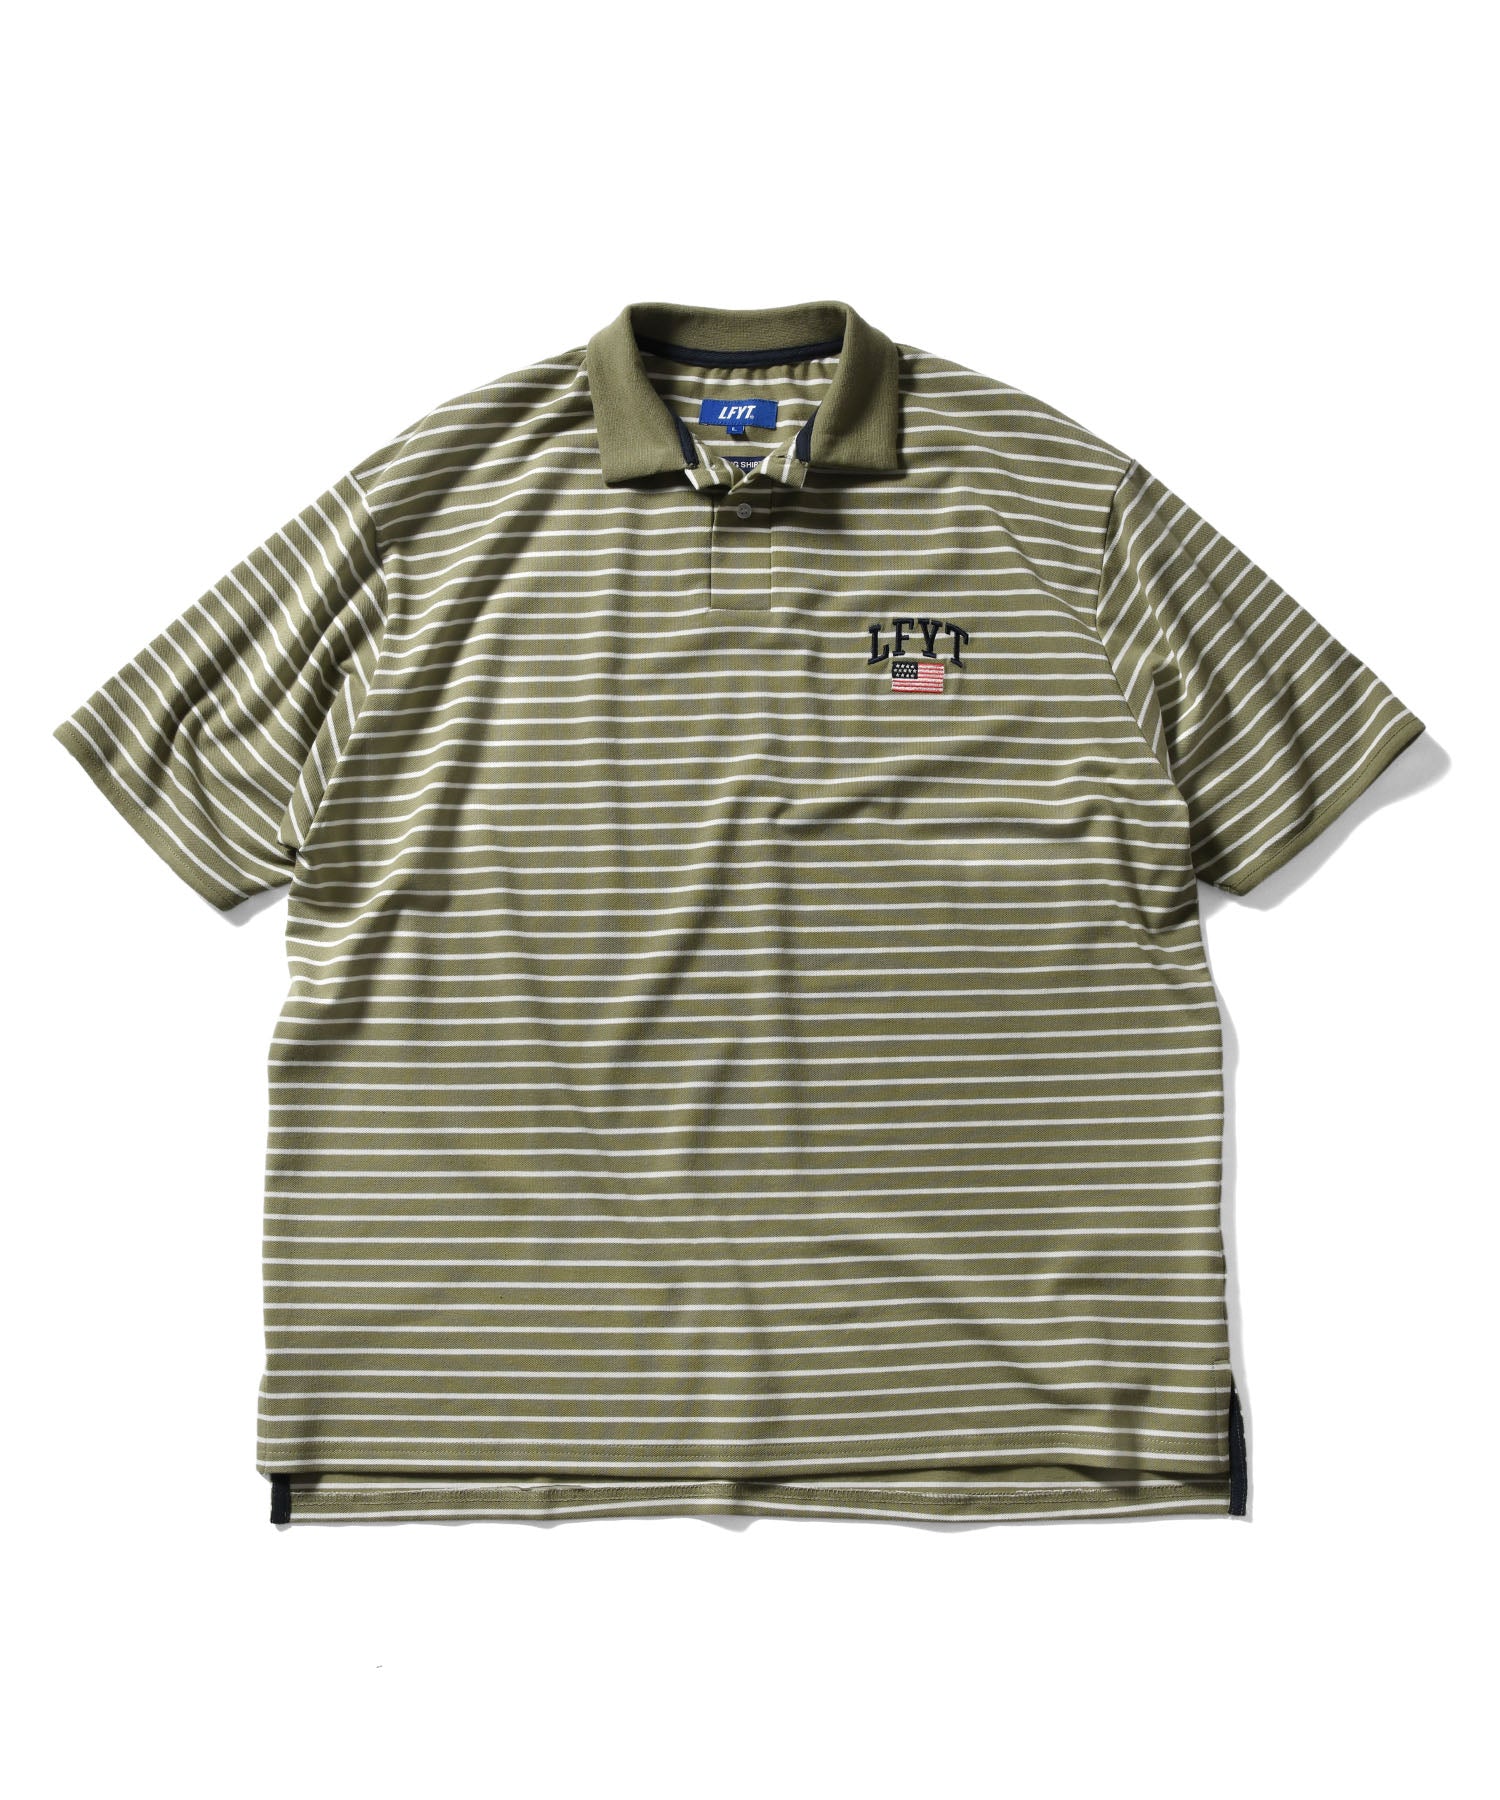 LFYT OLD GLORY ARCH LOGO STRIPED POLO SHIRT LS220301 GREEN